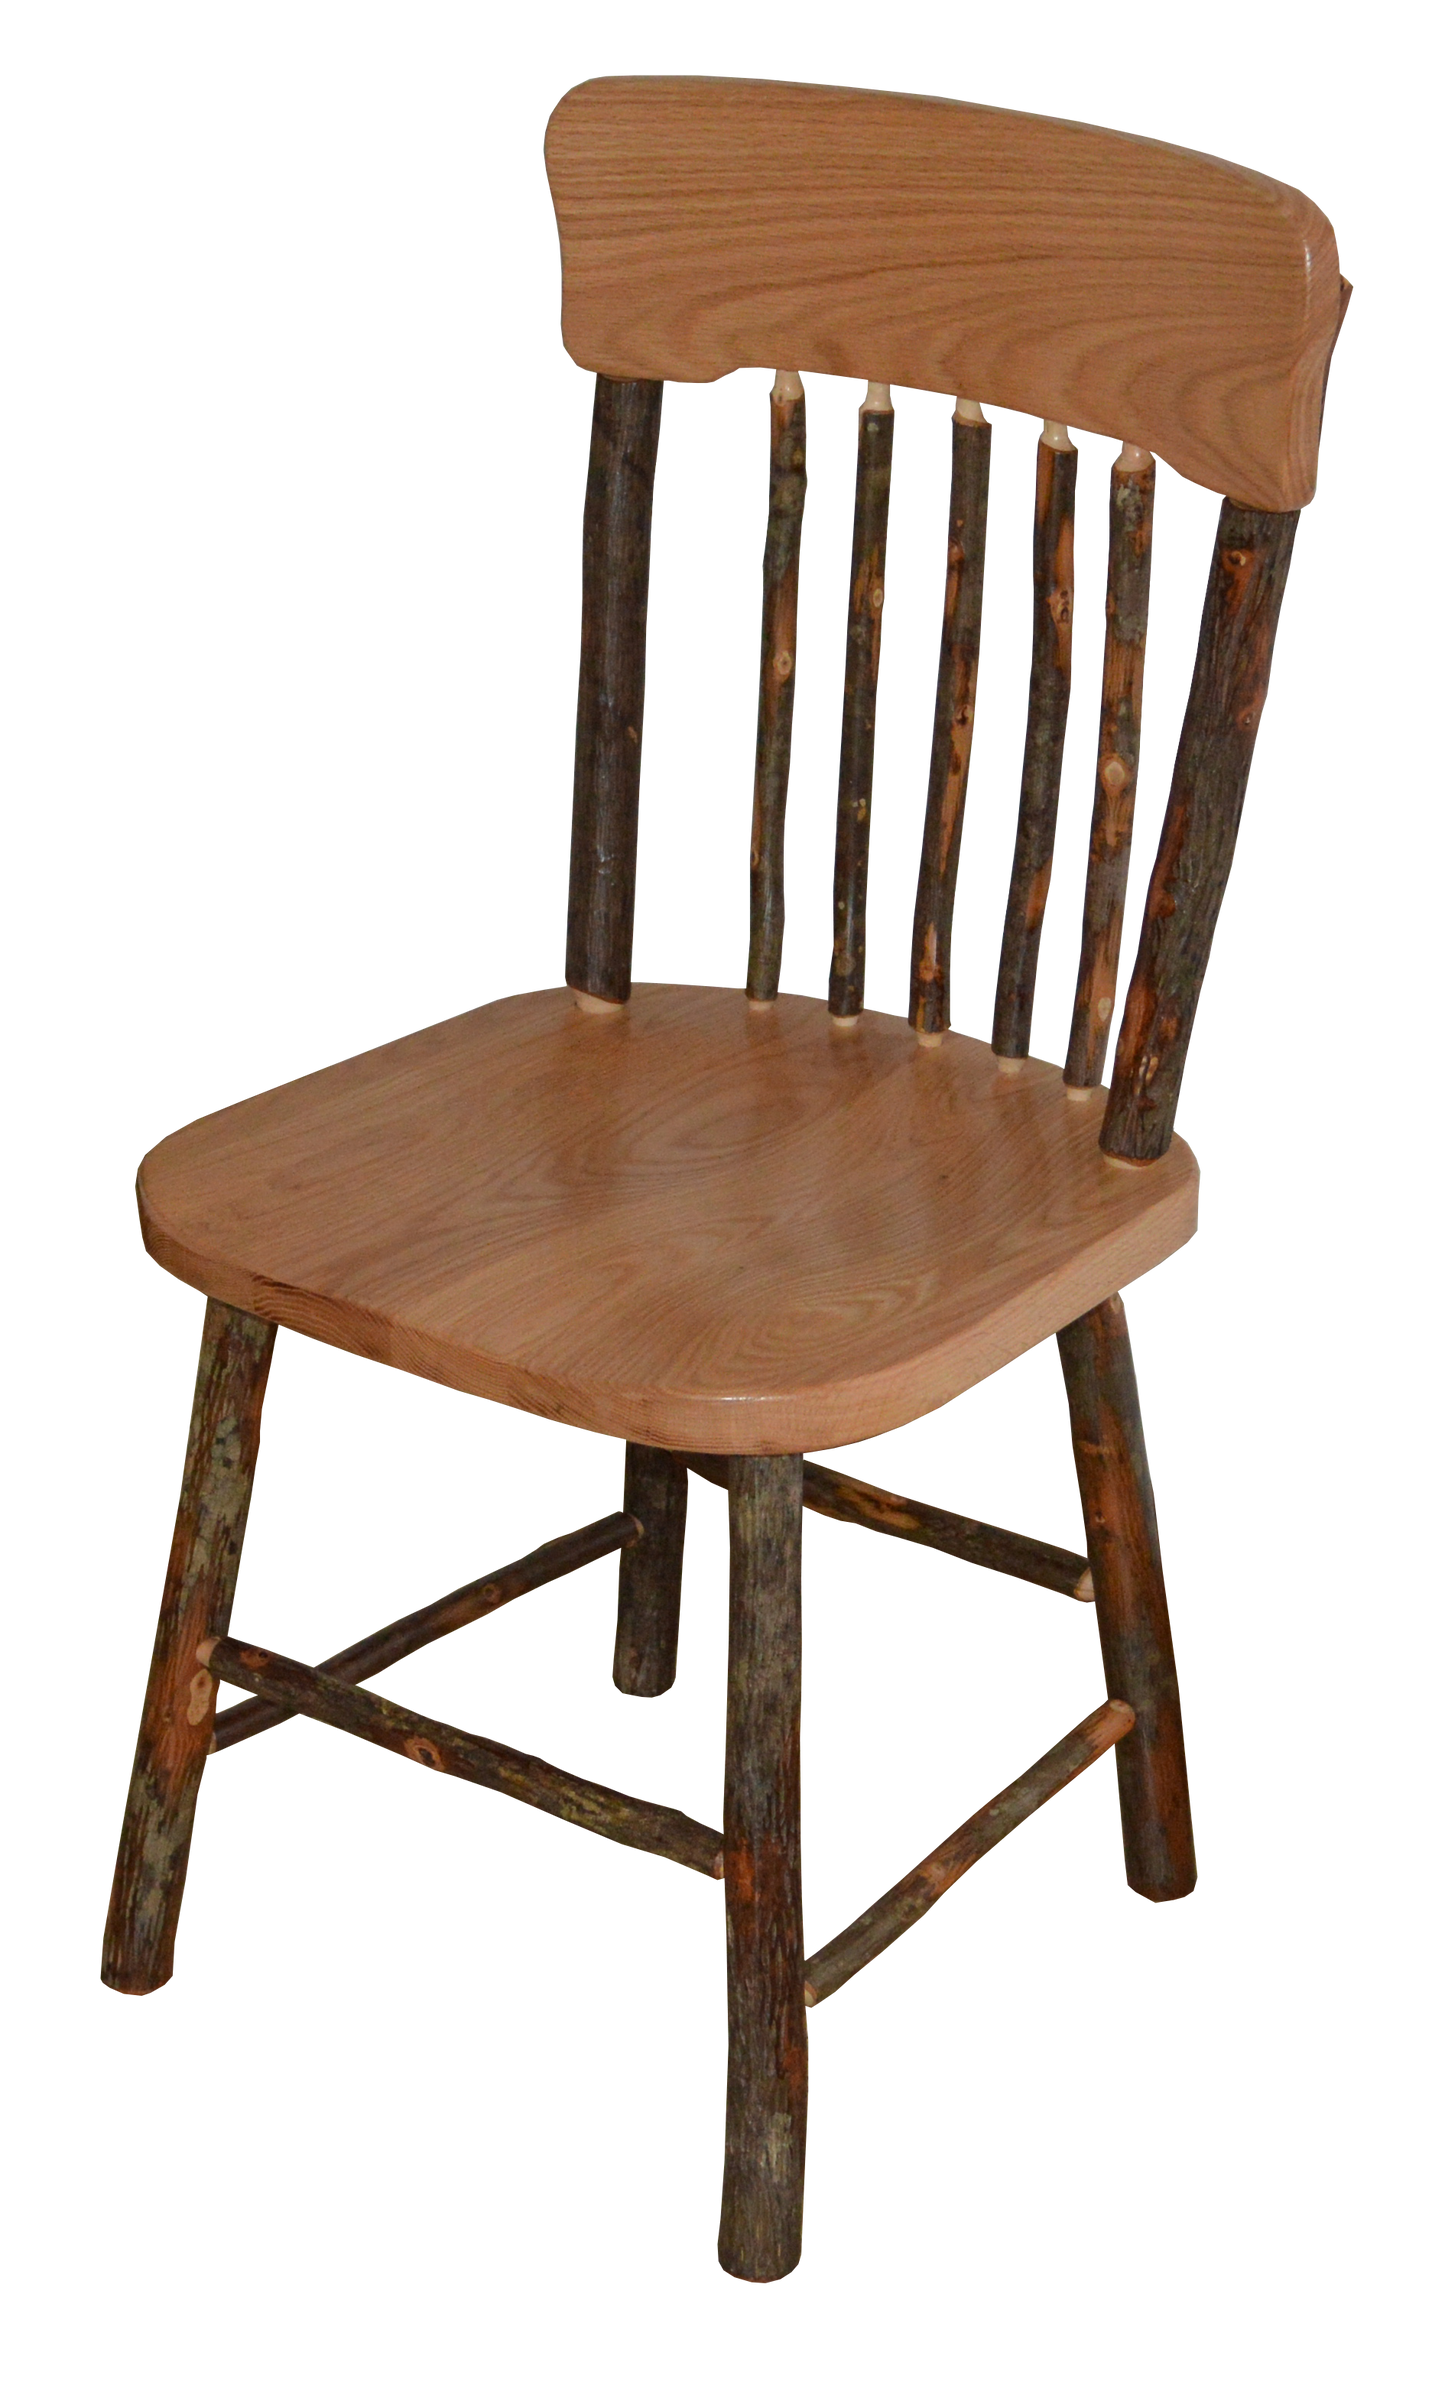 A&L Furniture Co. Amish Hickory Panel Back Dining Chair - LEAD TIME TO SHIP 10 BUSINESS DAYS